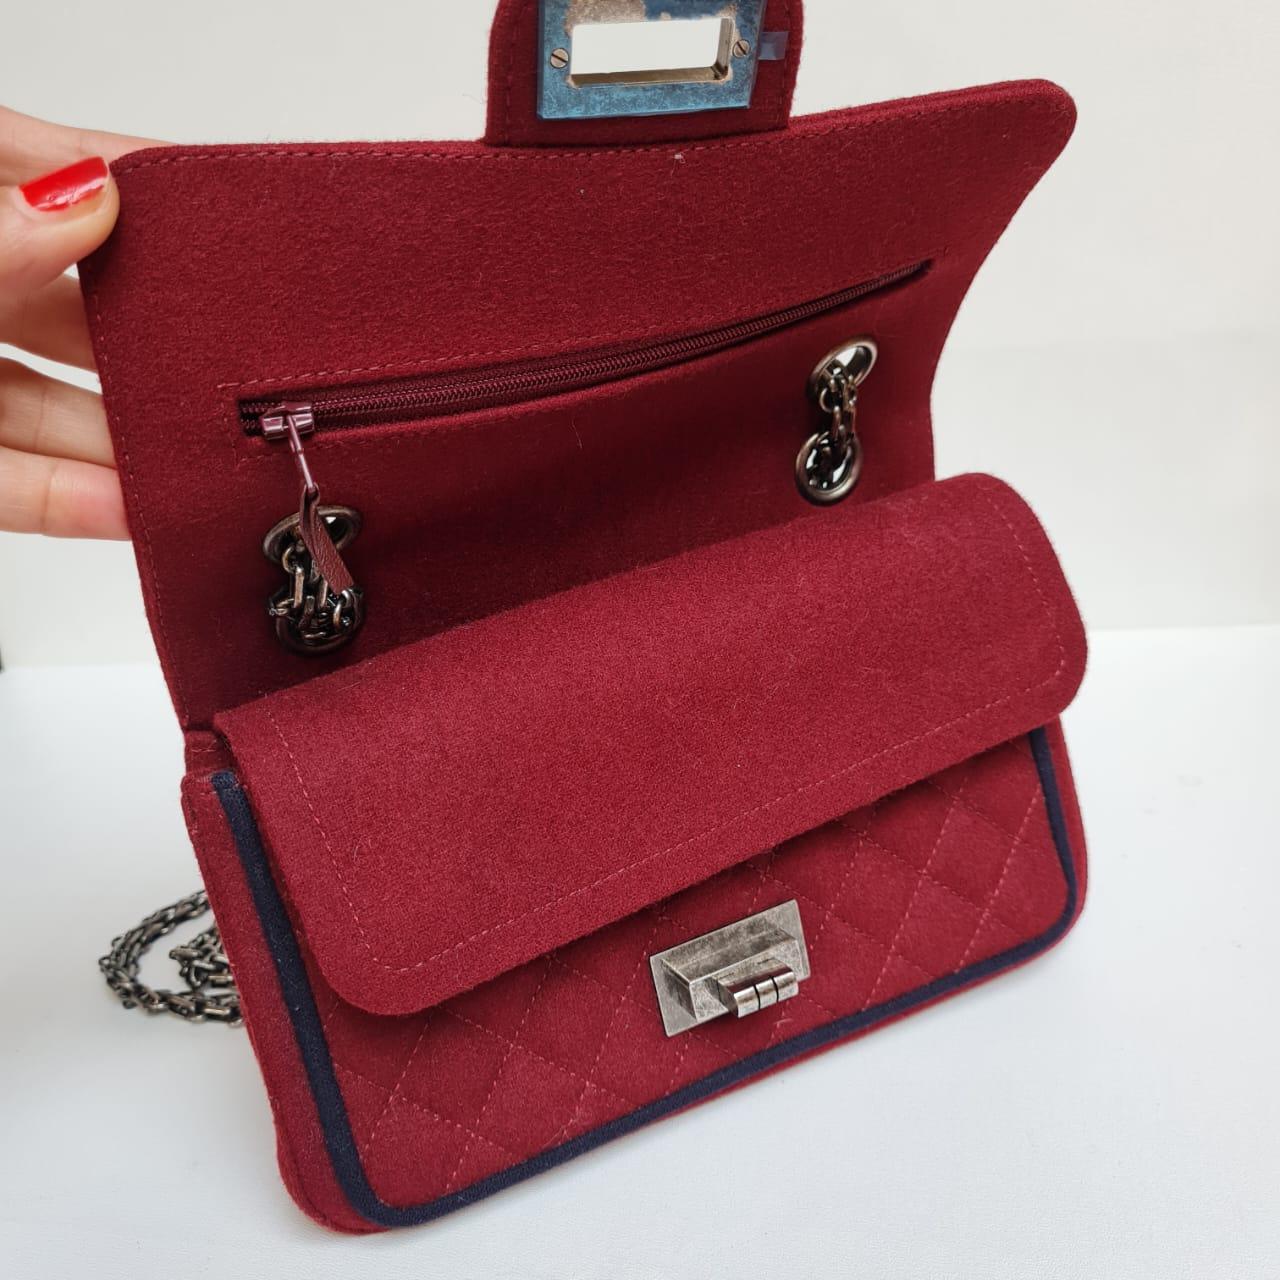 Chanel 2015 Red Edelweiss Reissue Wool Flap Bag For Sale 16